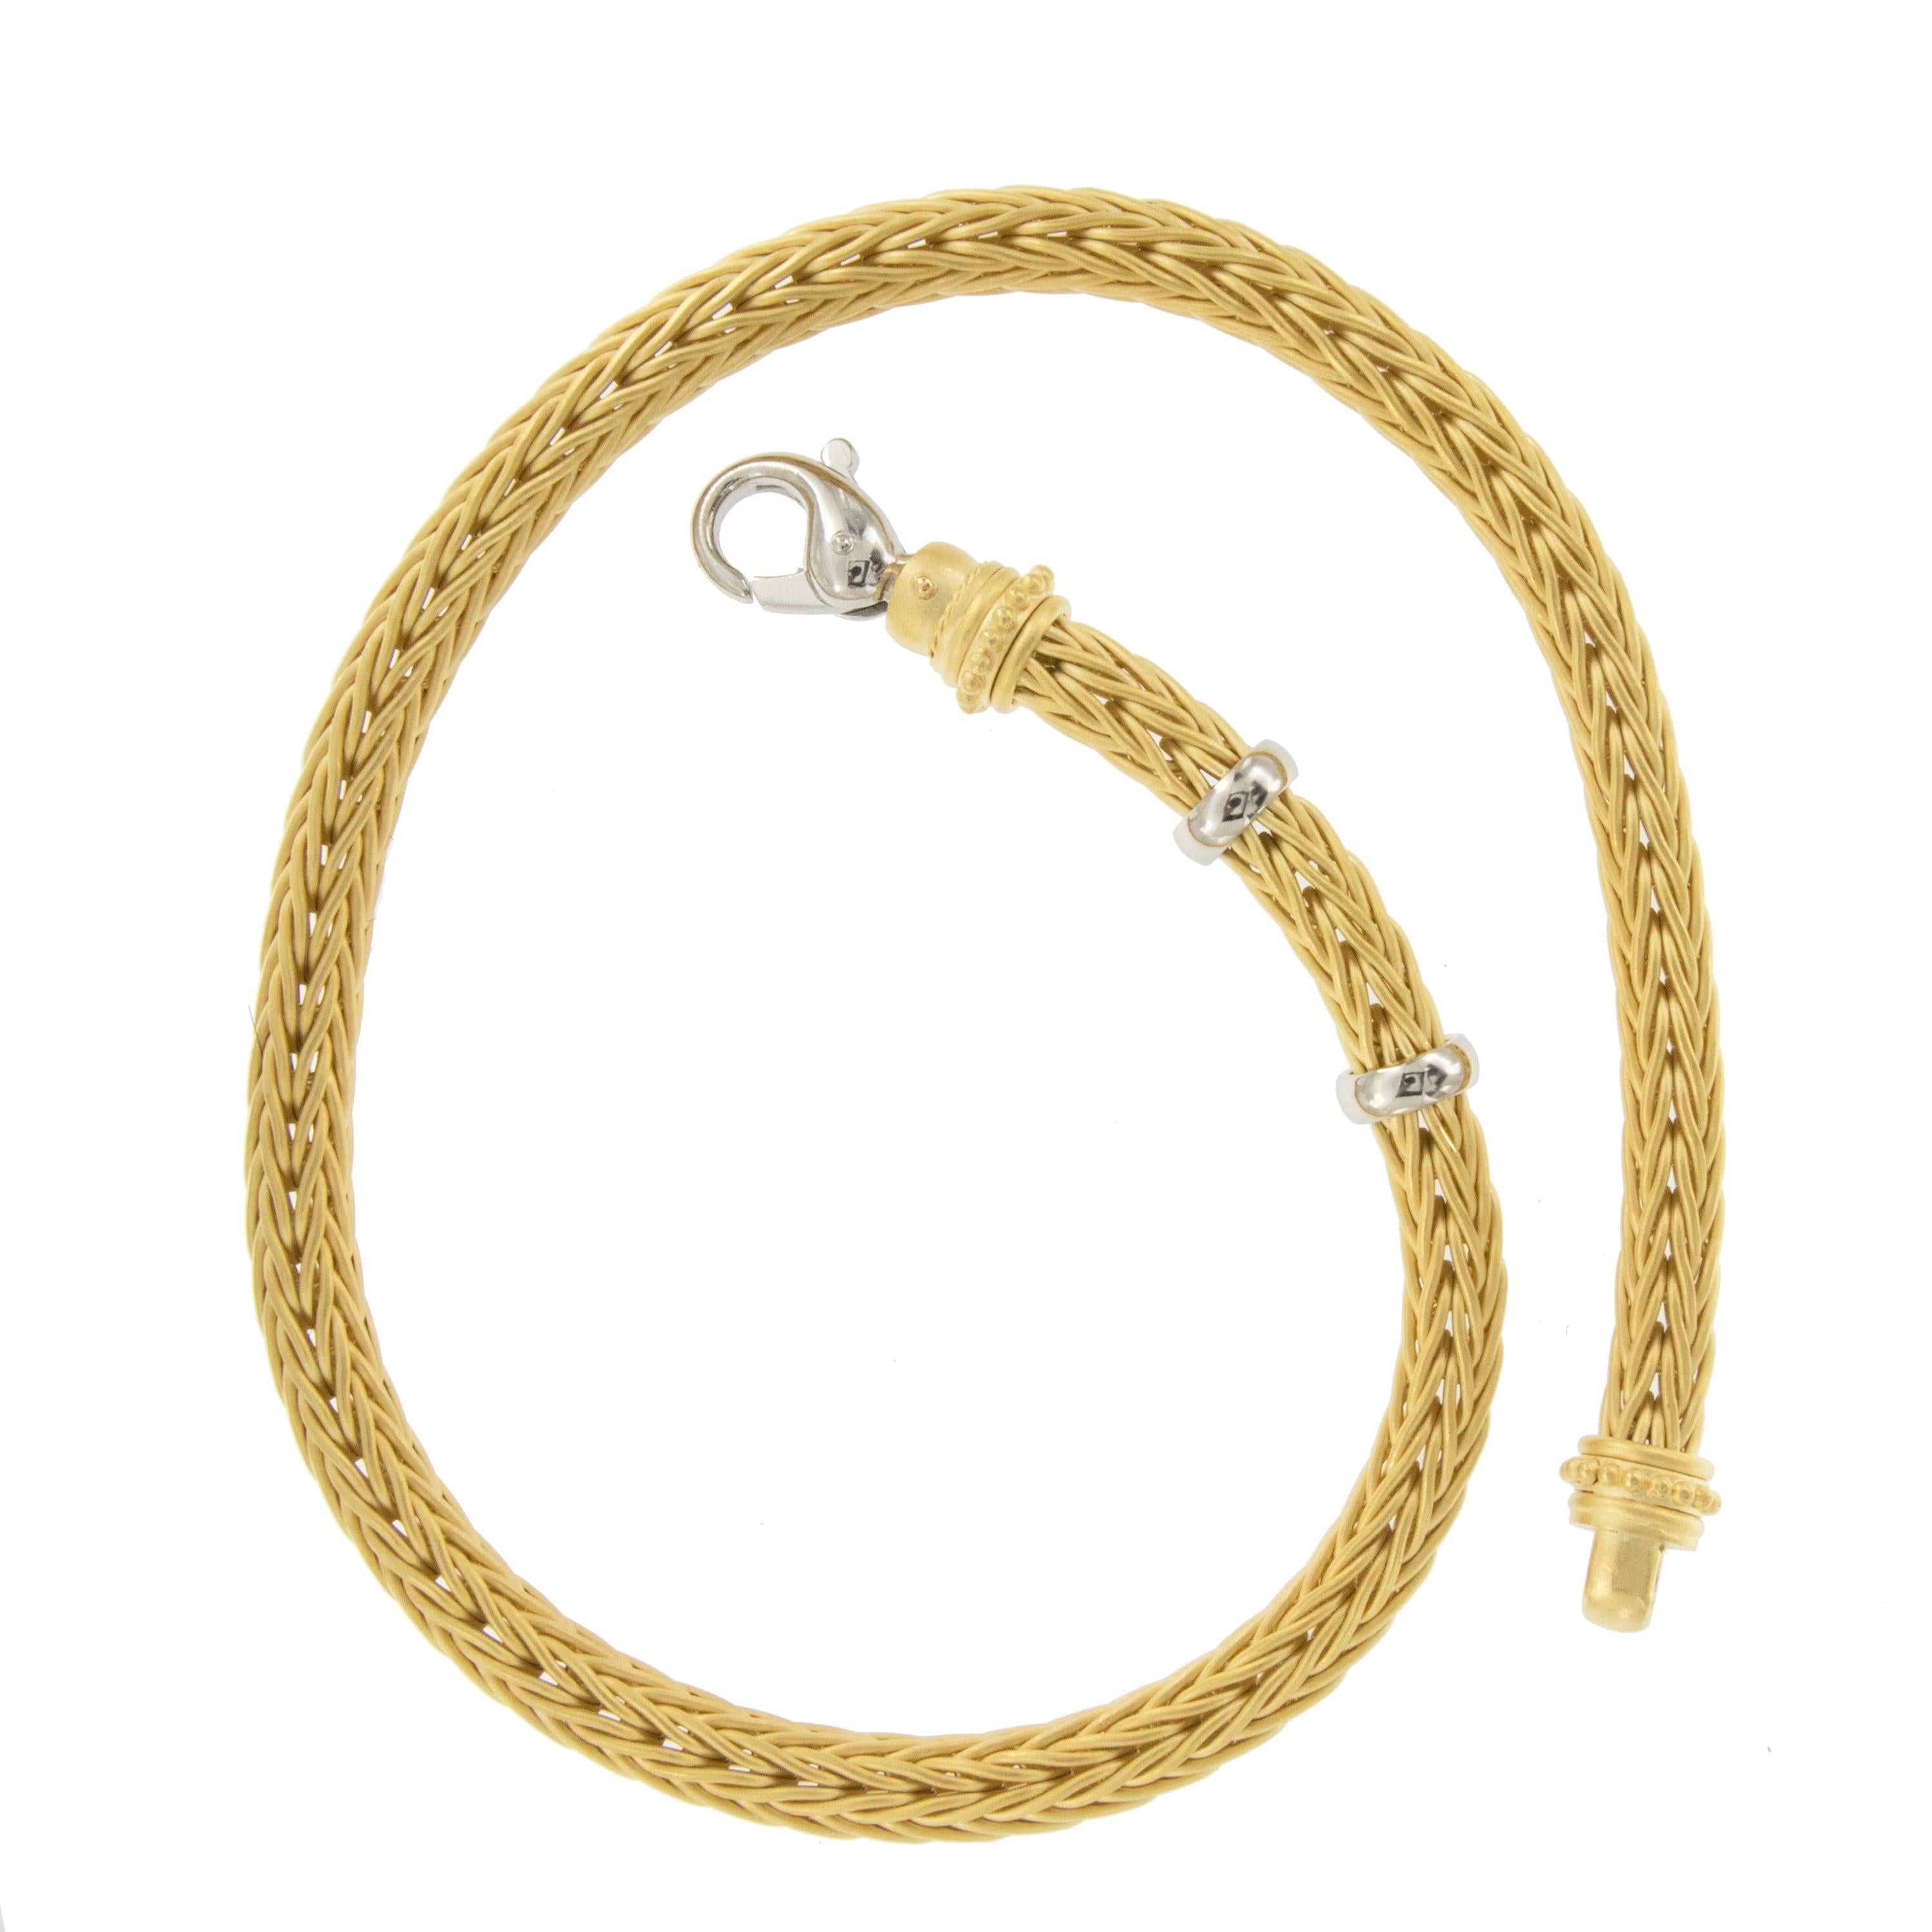 Rarely seen, this fabulous, heavy 18 karat yellow gold necklace is beautifully hand-fabricated (woven) in a wheat weave pattern. It is adorned with finials ornamented with granulation and Platinum accents.   A spectacular example of goldsmith's art,